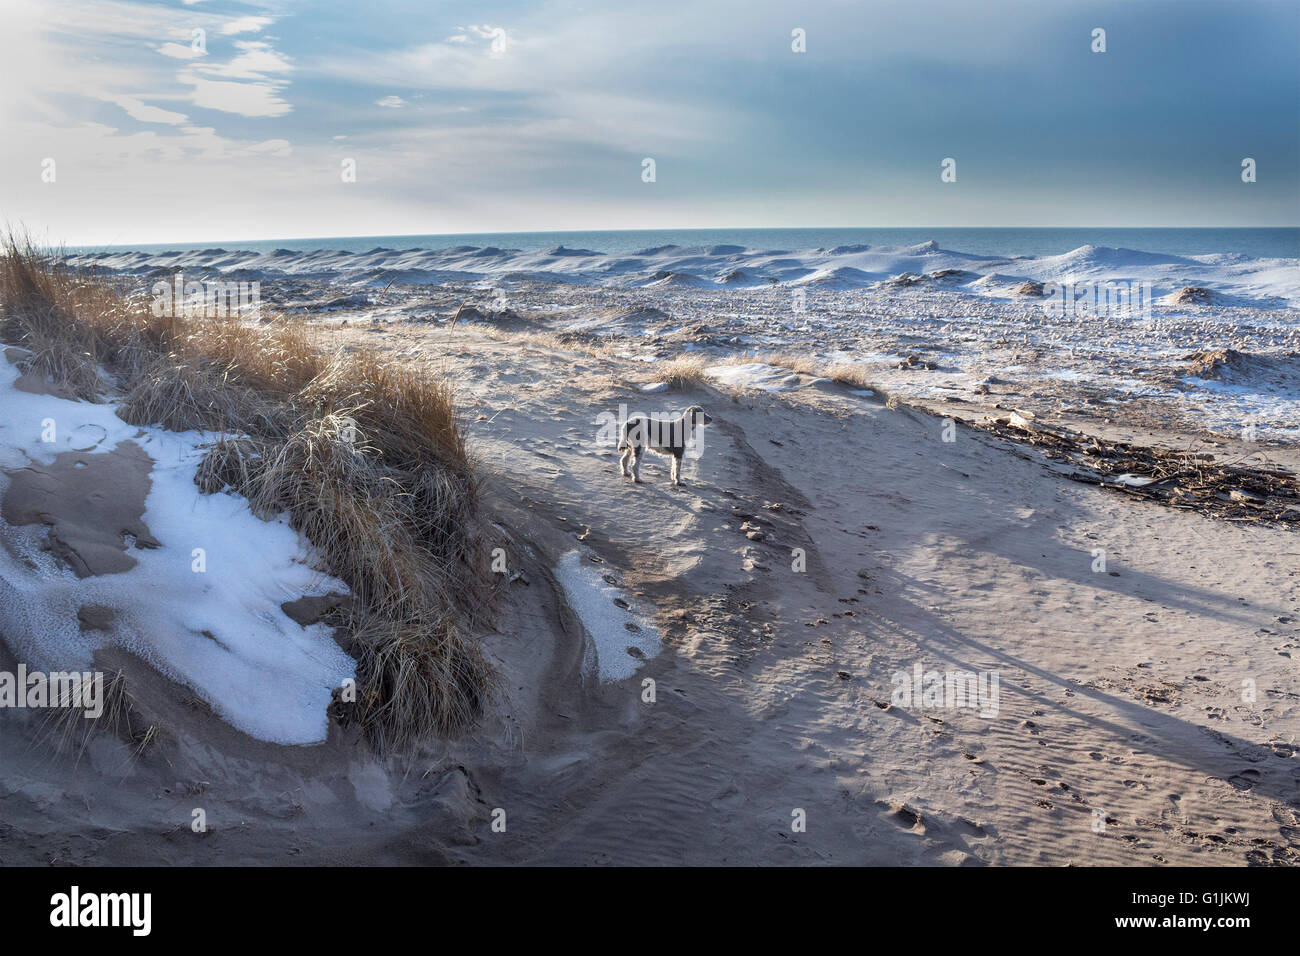 Standard poodle stands in the sand on the beach of a frozen Lake Huron in Grand Bend, Ontario, Canada Stock Photo